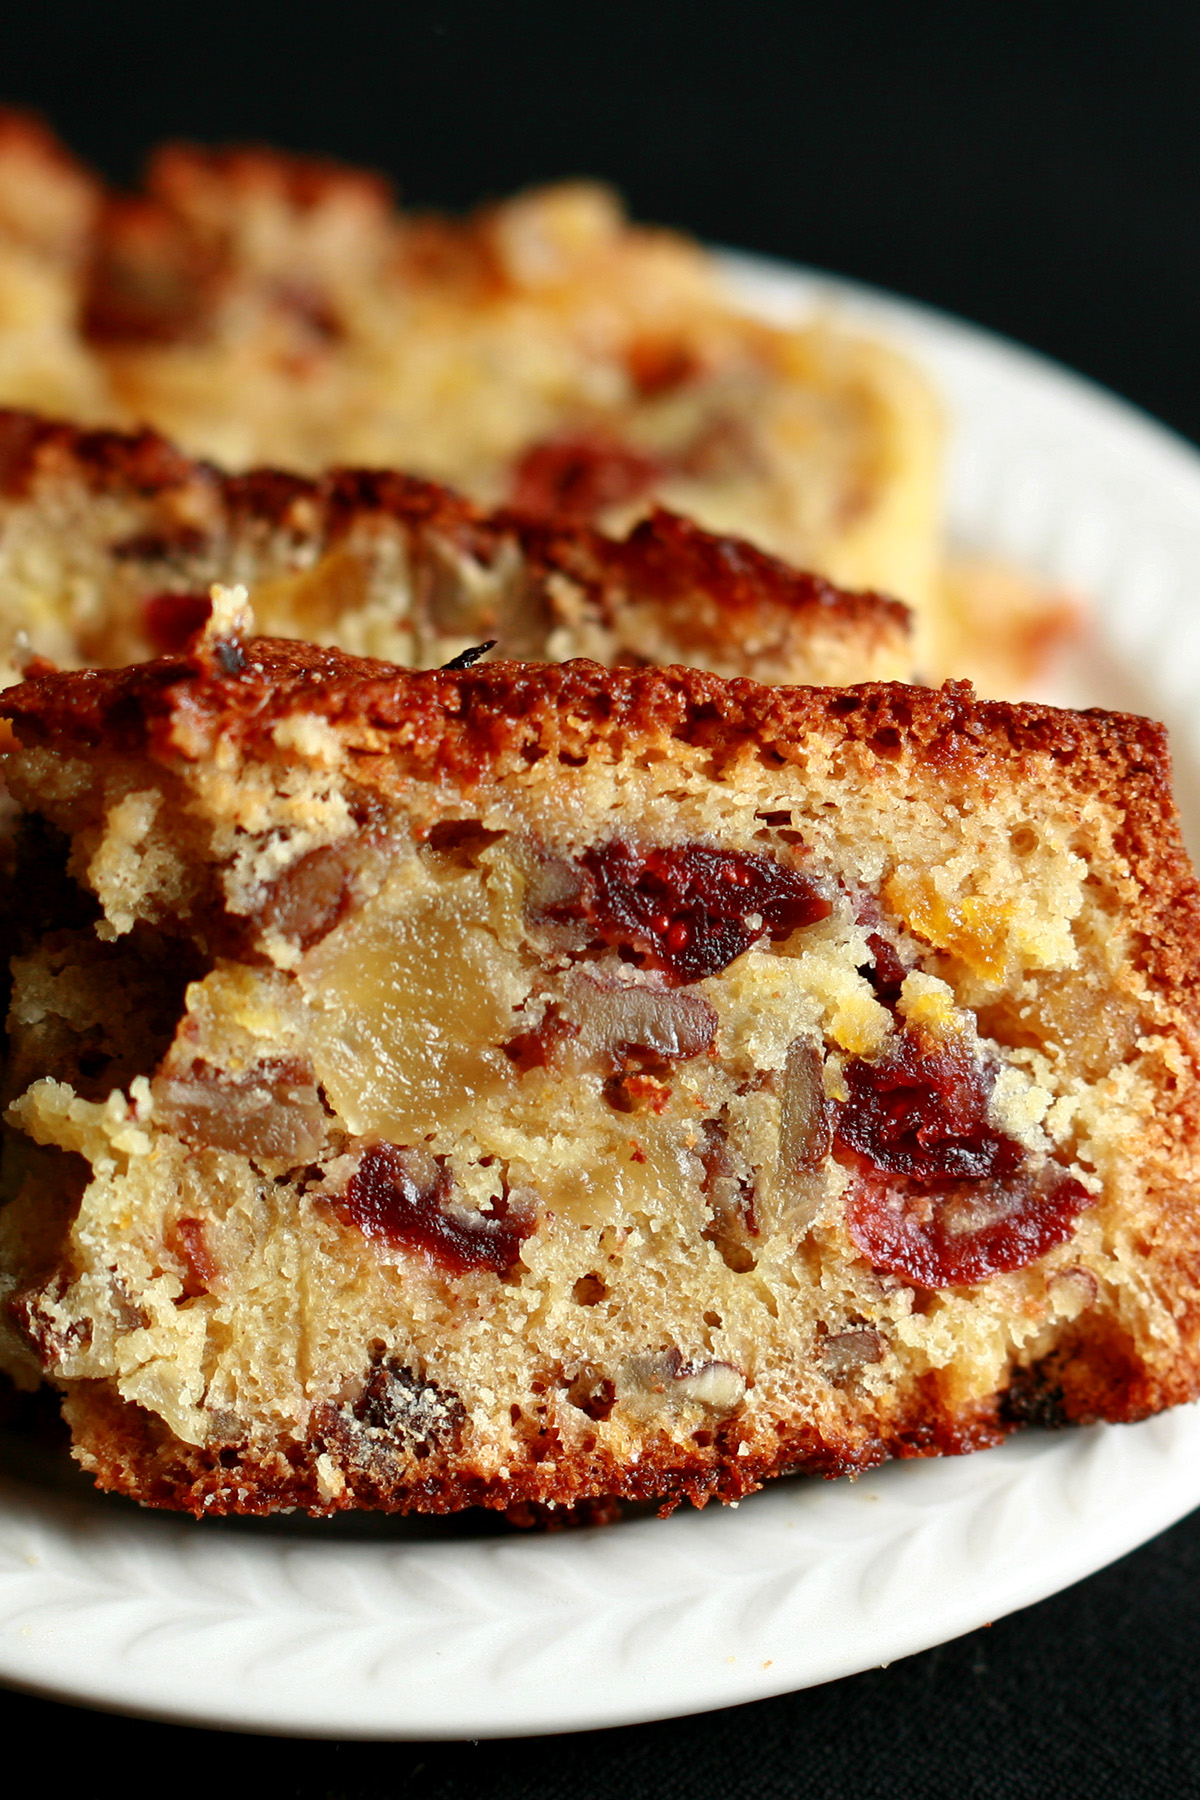 "Slices of gluten free fruitcake, on a small white plate. The cake is generously studded with dried - not candied - fruit.